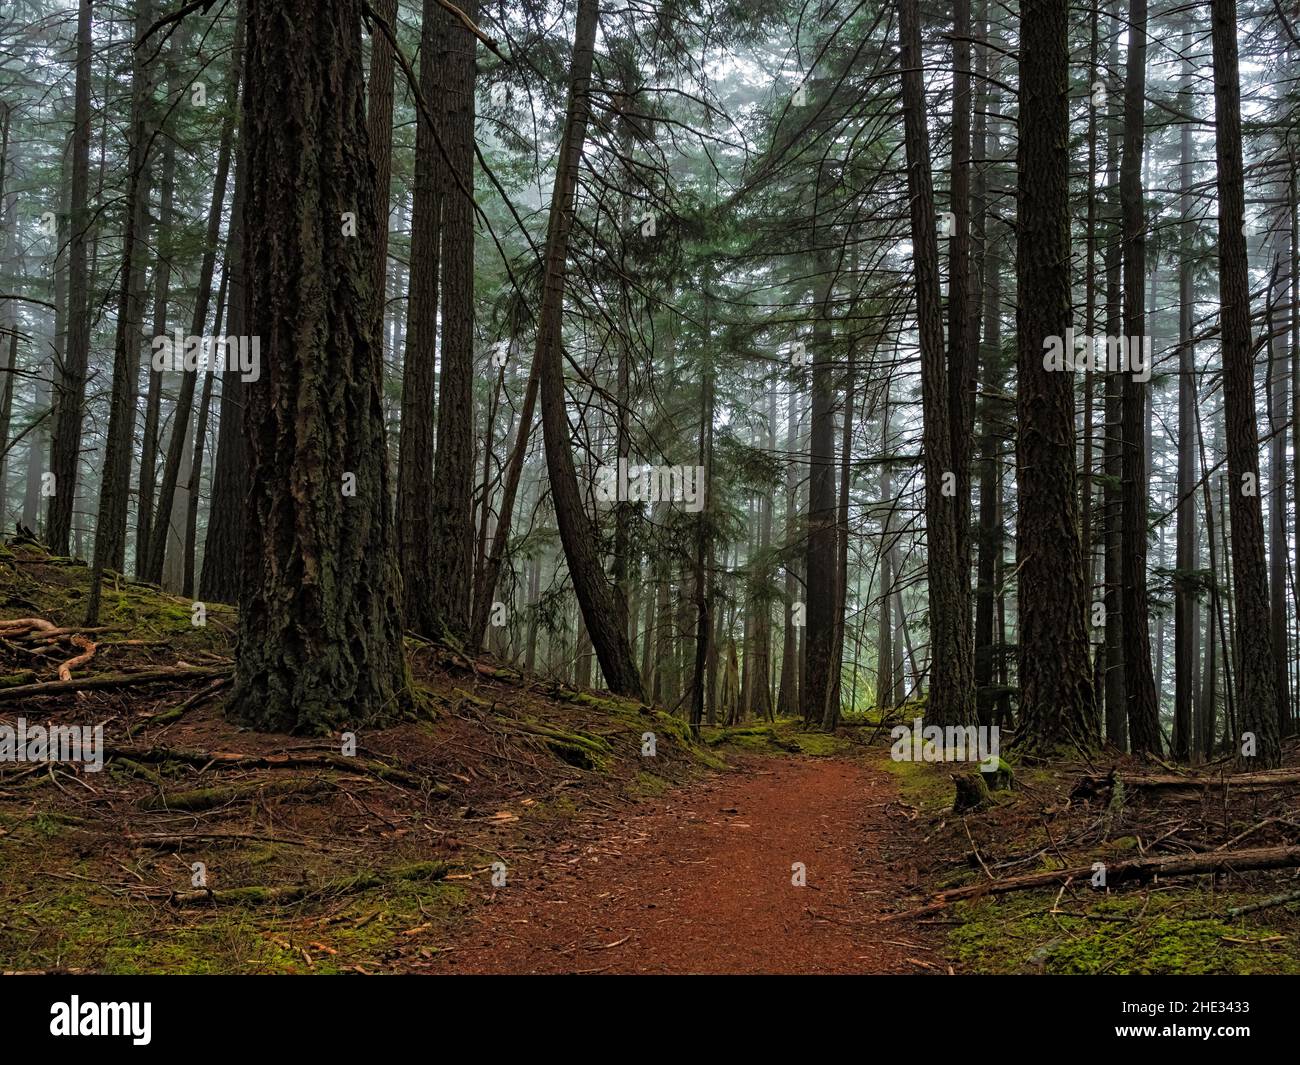 WA21038-00...WASHINGTON - A foggy day along the Mount Pickett Trail in Moran State Park on Orcas Island; one of the San Juan Islands. Stock Photo